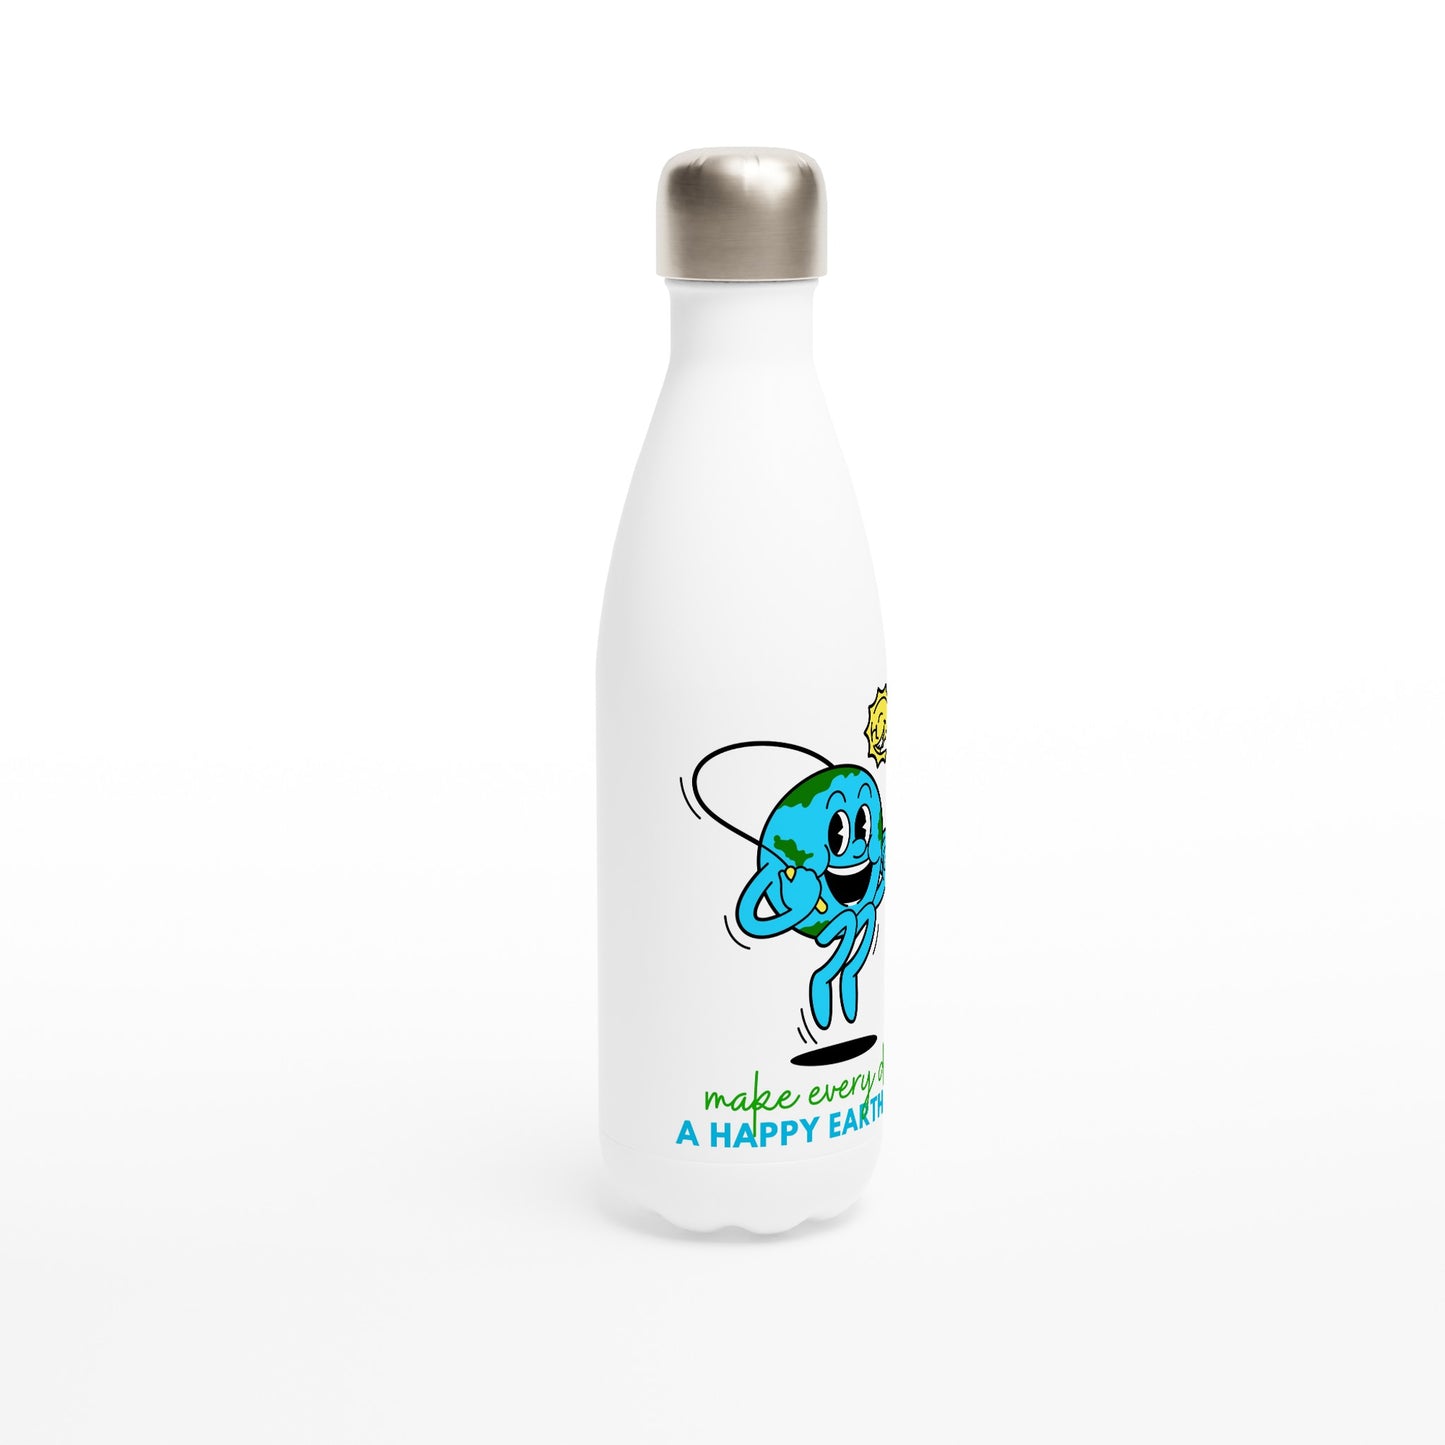 Make Every Day A Happy Earth Day - White 17oz Stainless Steel Water Bottle White Water Bottle Environment